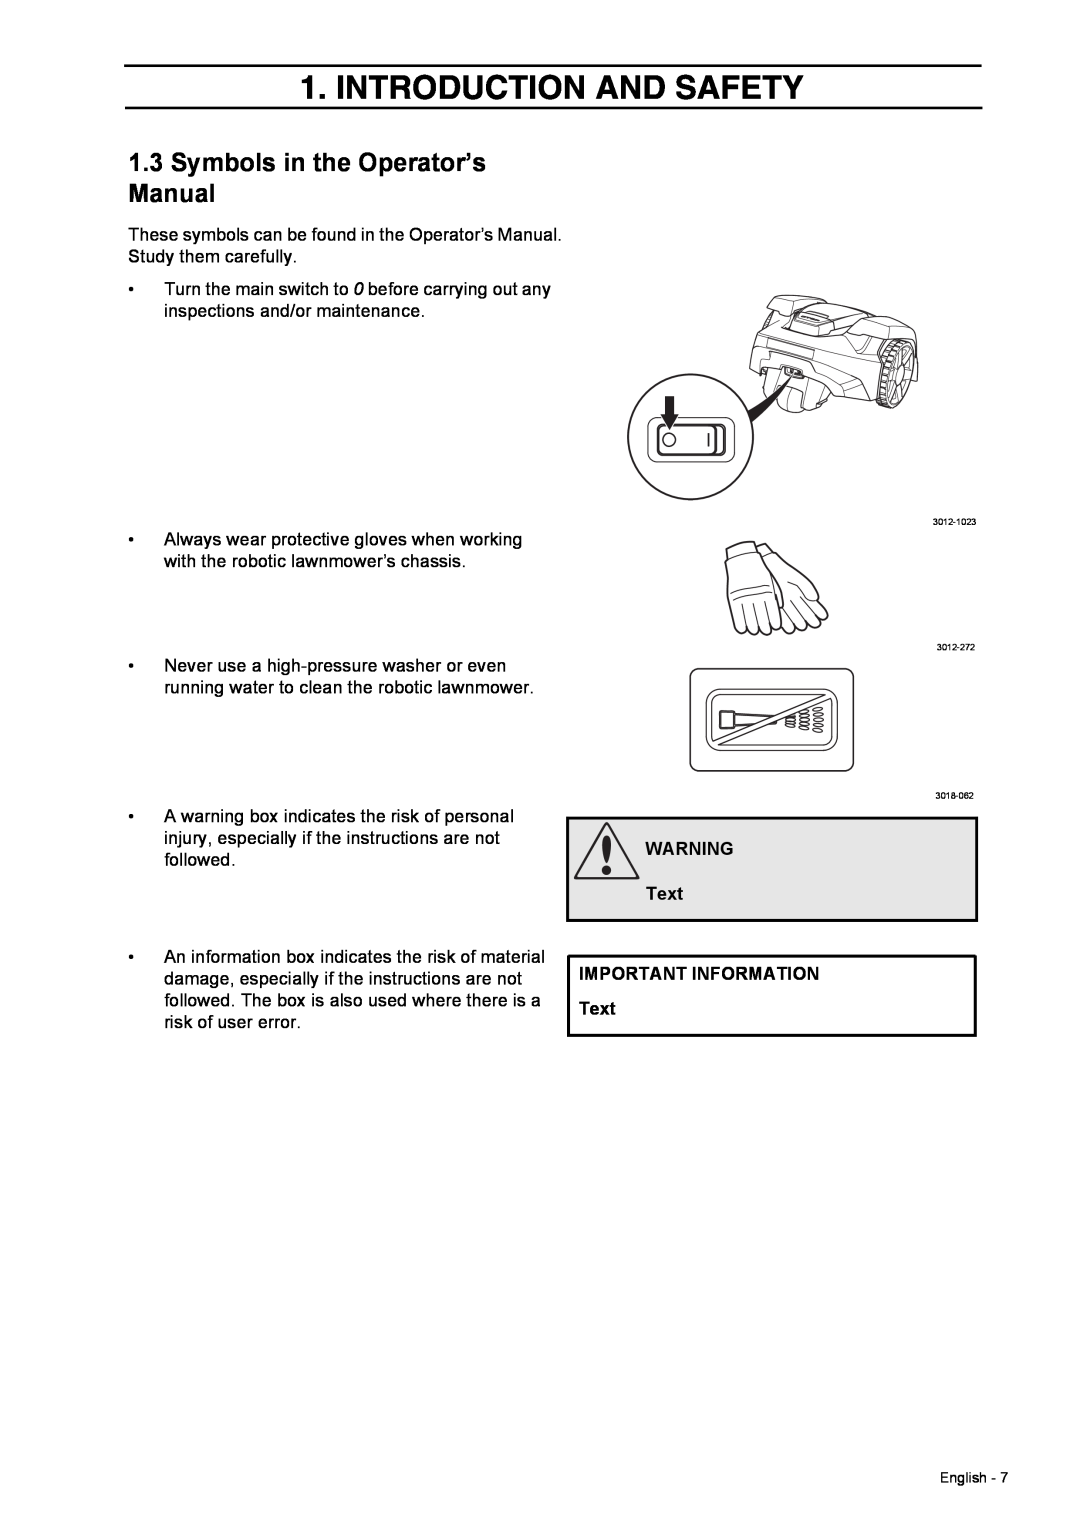 Husqvarna 308 manual Symbols in the Operator’s Manual, Text IMPORTANT INFORMATION Text, Introduction And Safety 